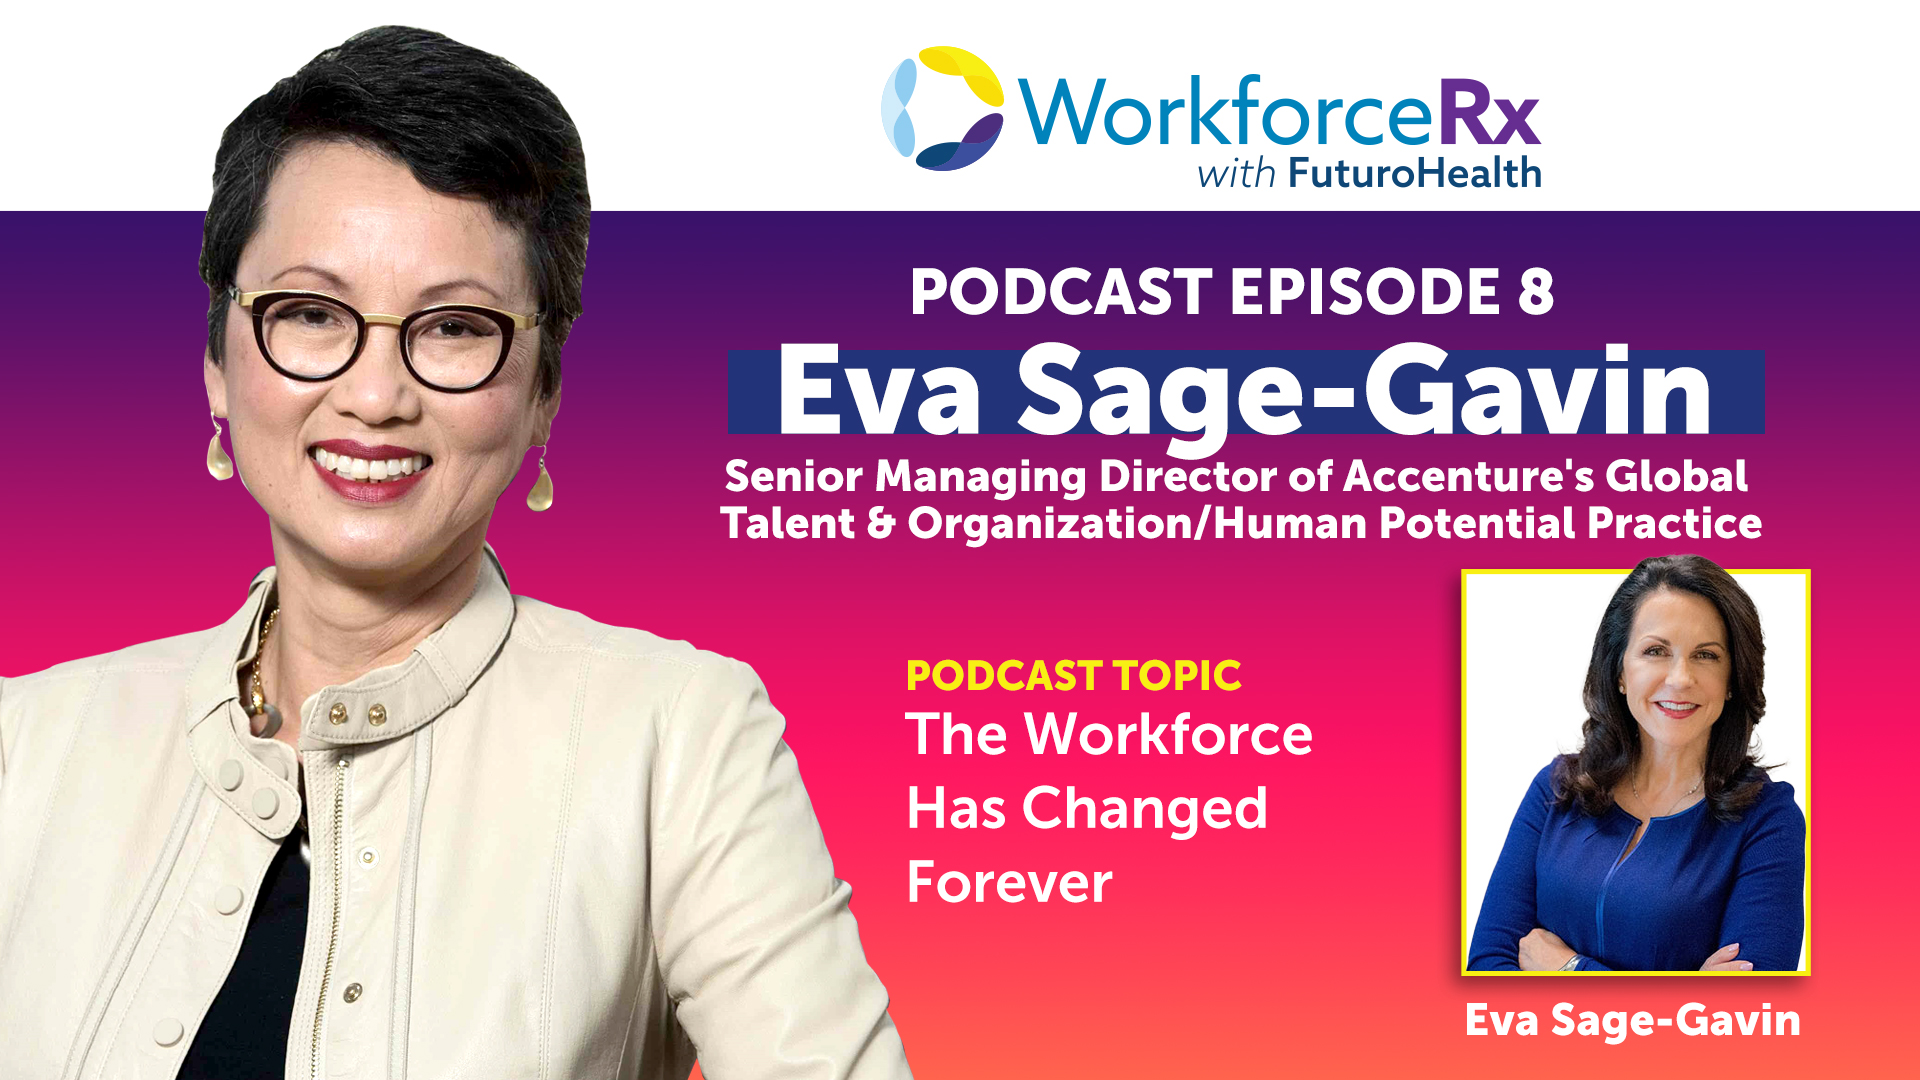 Eva Sage-Gavin, Senior Managing Director of Accenture's Global Talent & Organization/Human Potential Practice: “The Workforce Has Changed Forever.”